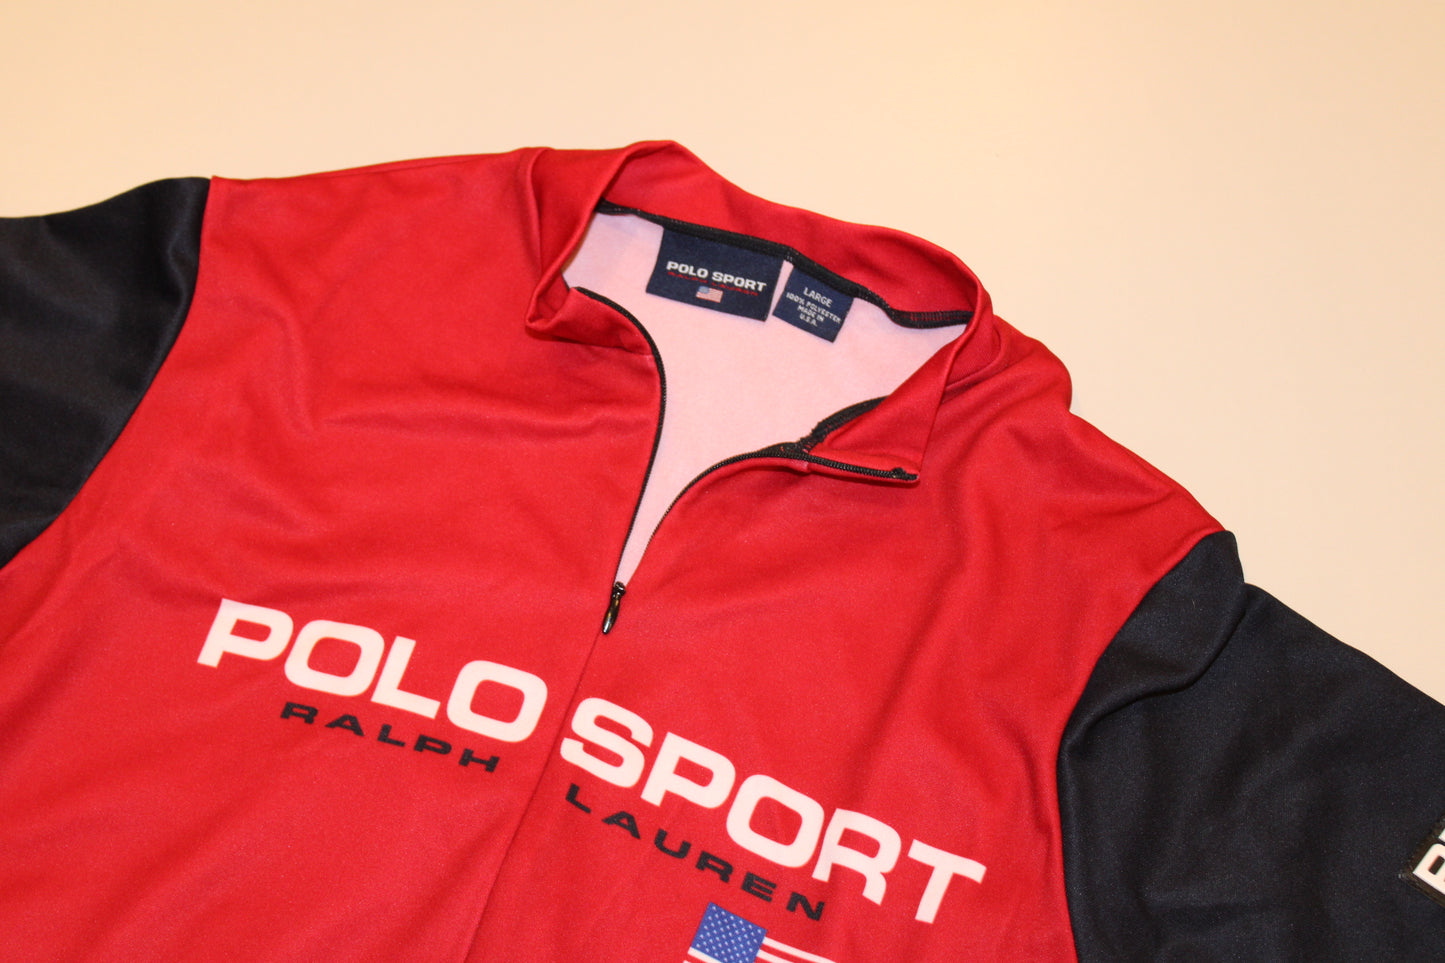 Vintage Polo Sport Cycling Jersey